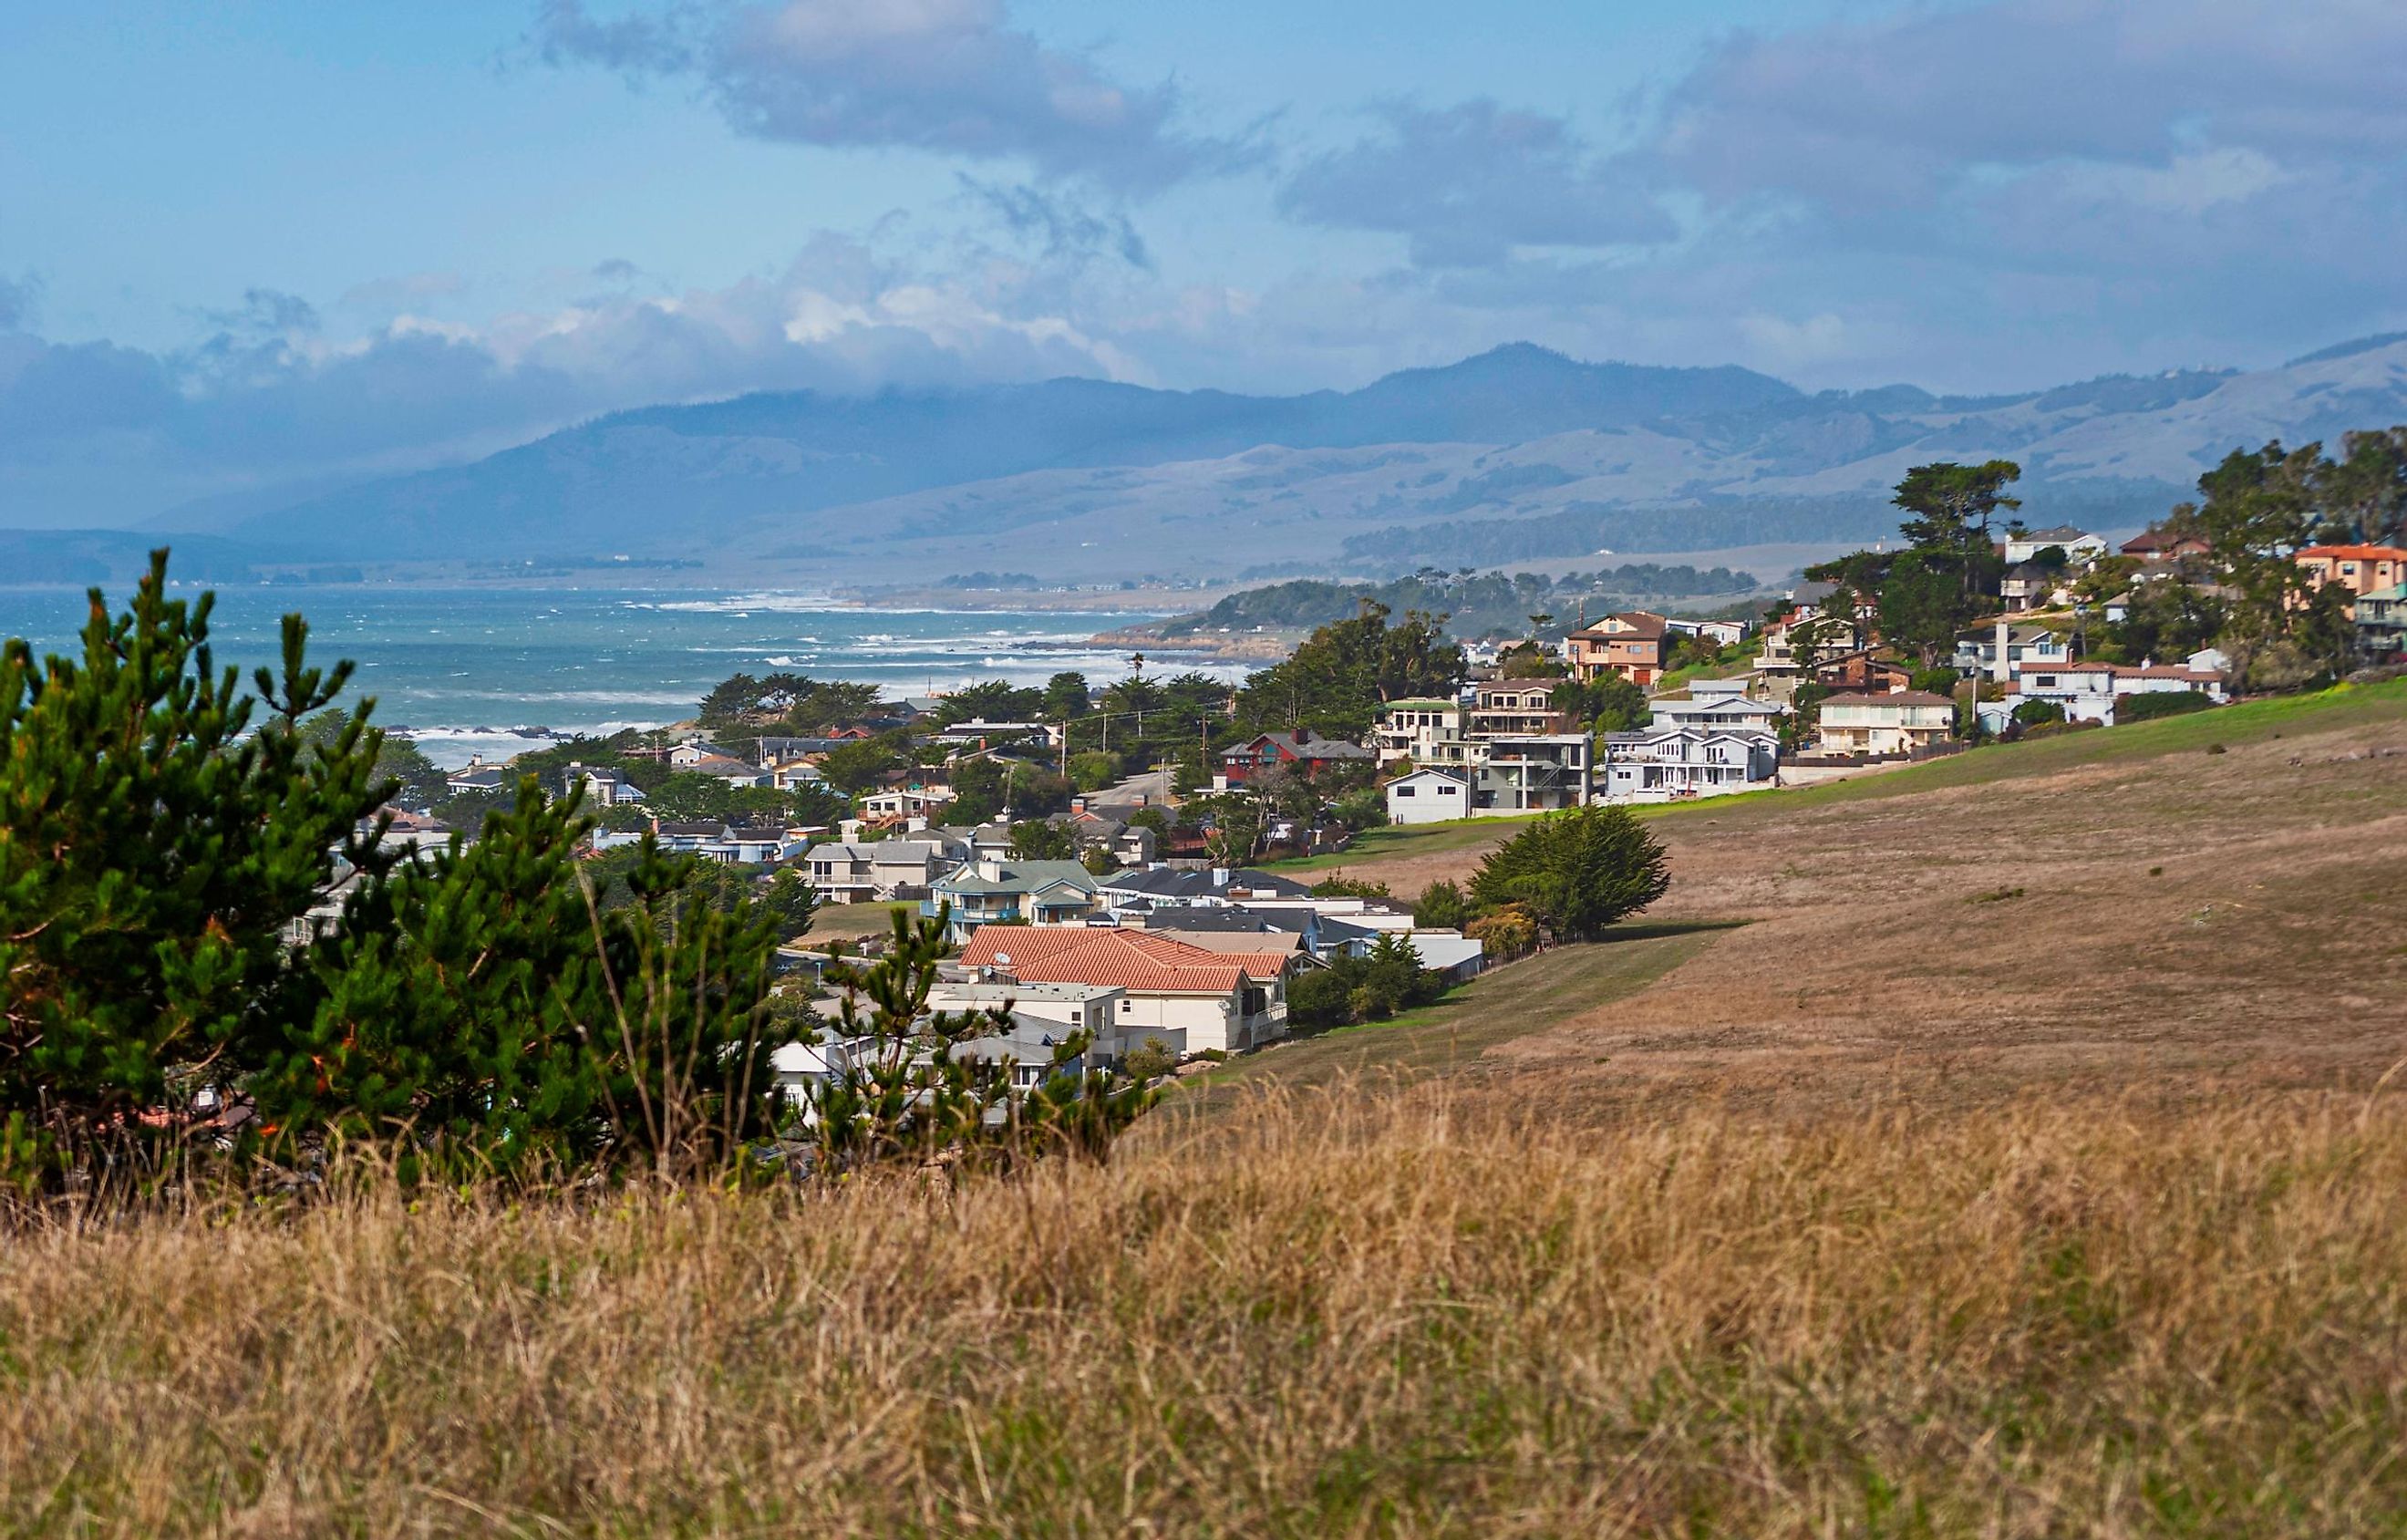 The charming coastal town of Cambria in California.